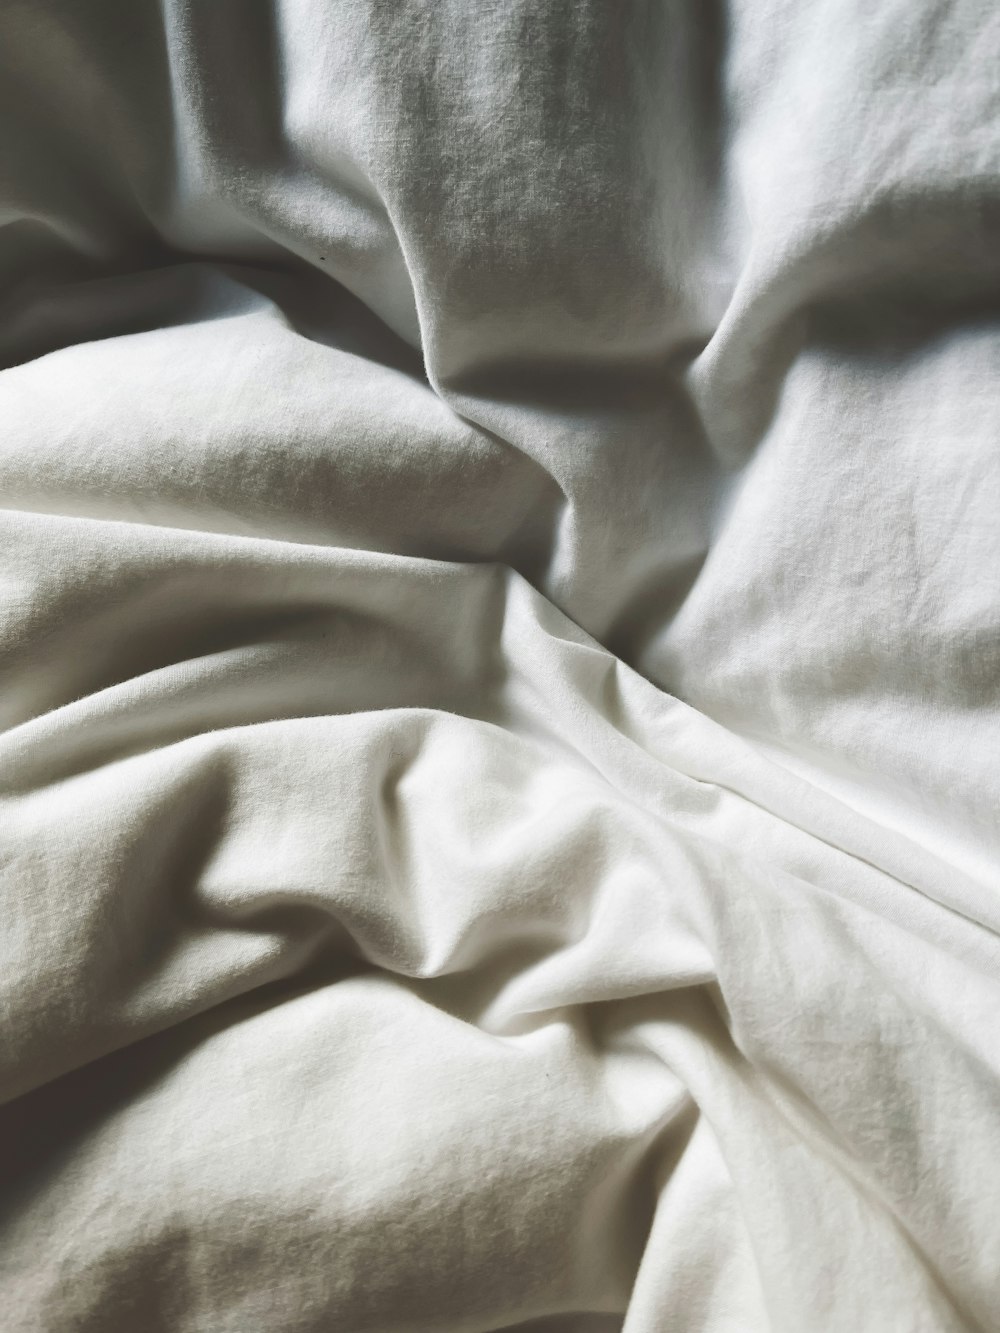 a close up of a bed with white sheets